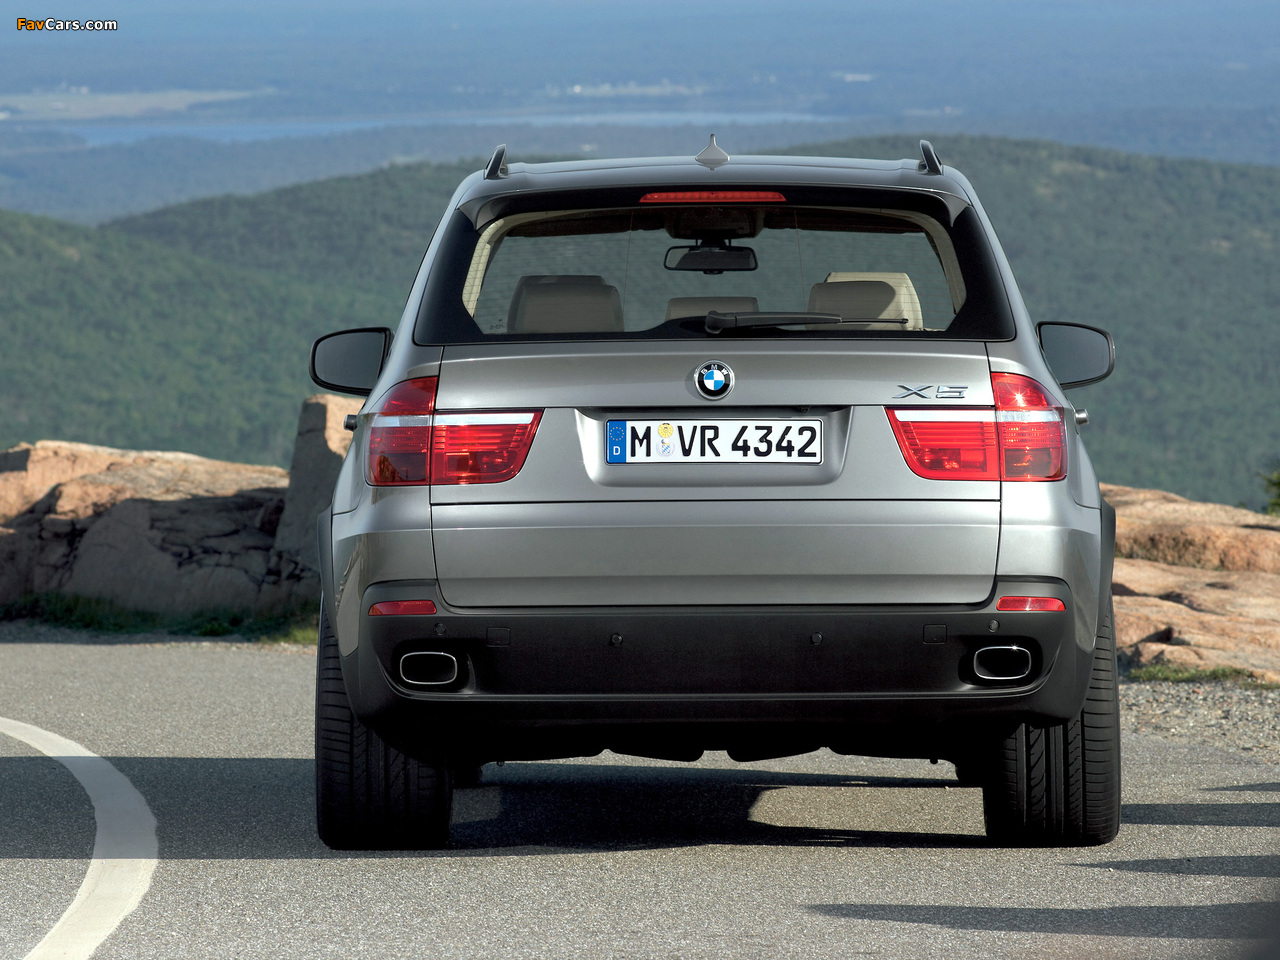 BMW X5 4.8i (E70) 2007–10 pictures (1280 x 960)